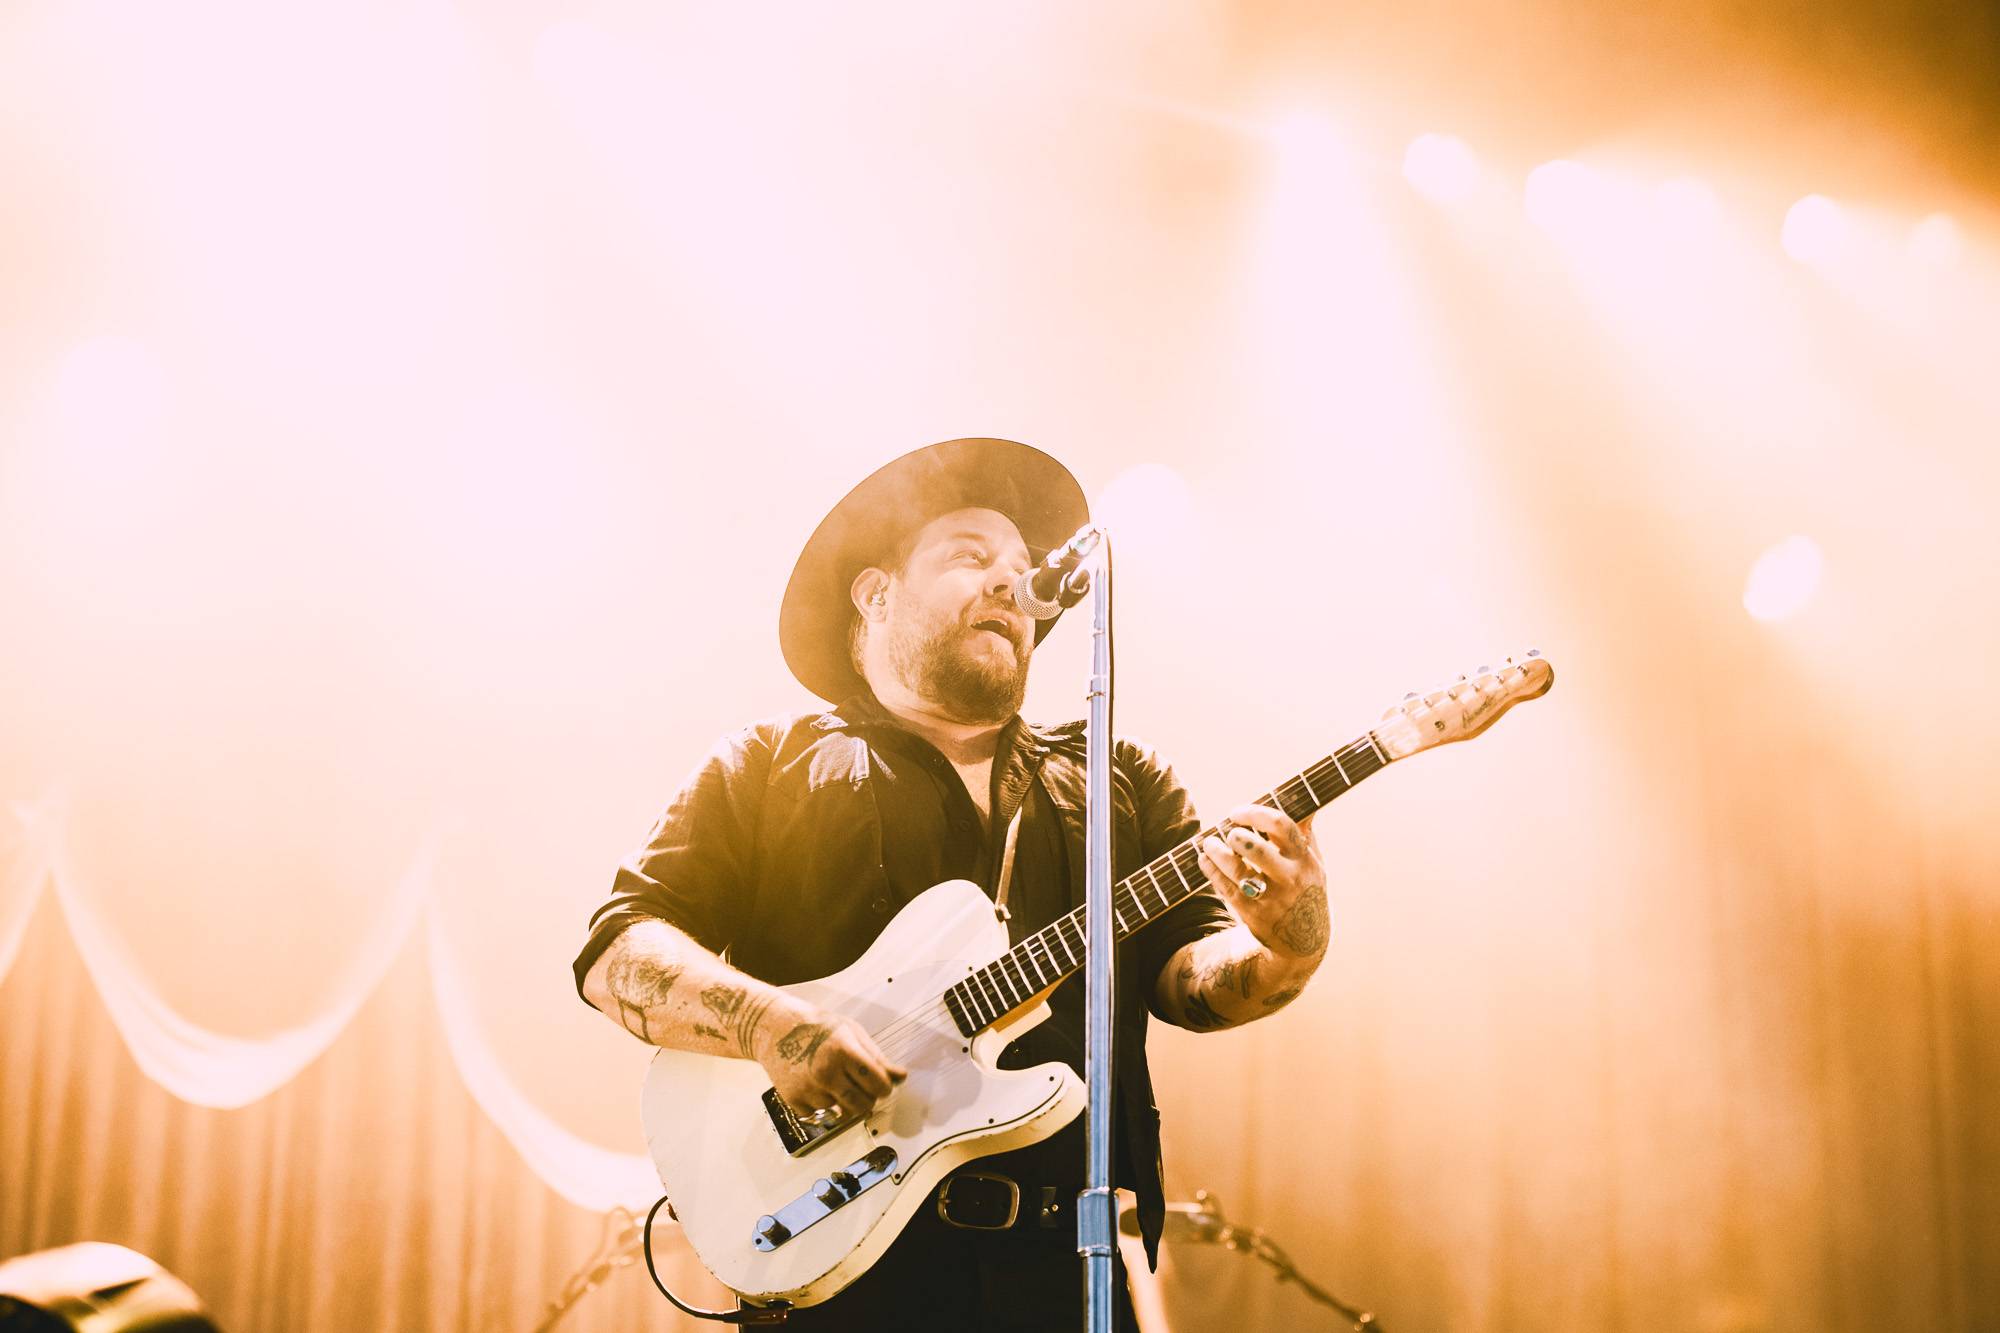 Nathaniel Rateliff at the PNE Amphitheatre, Vancouver, July 30 2019. Kelli Anne photo.